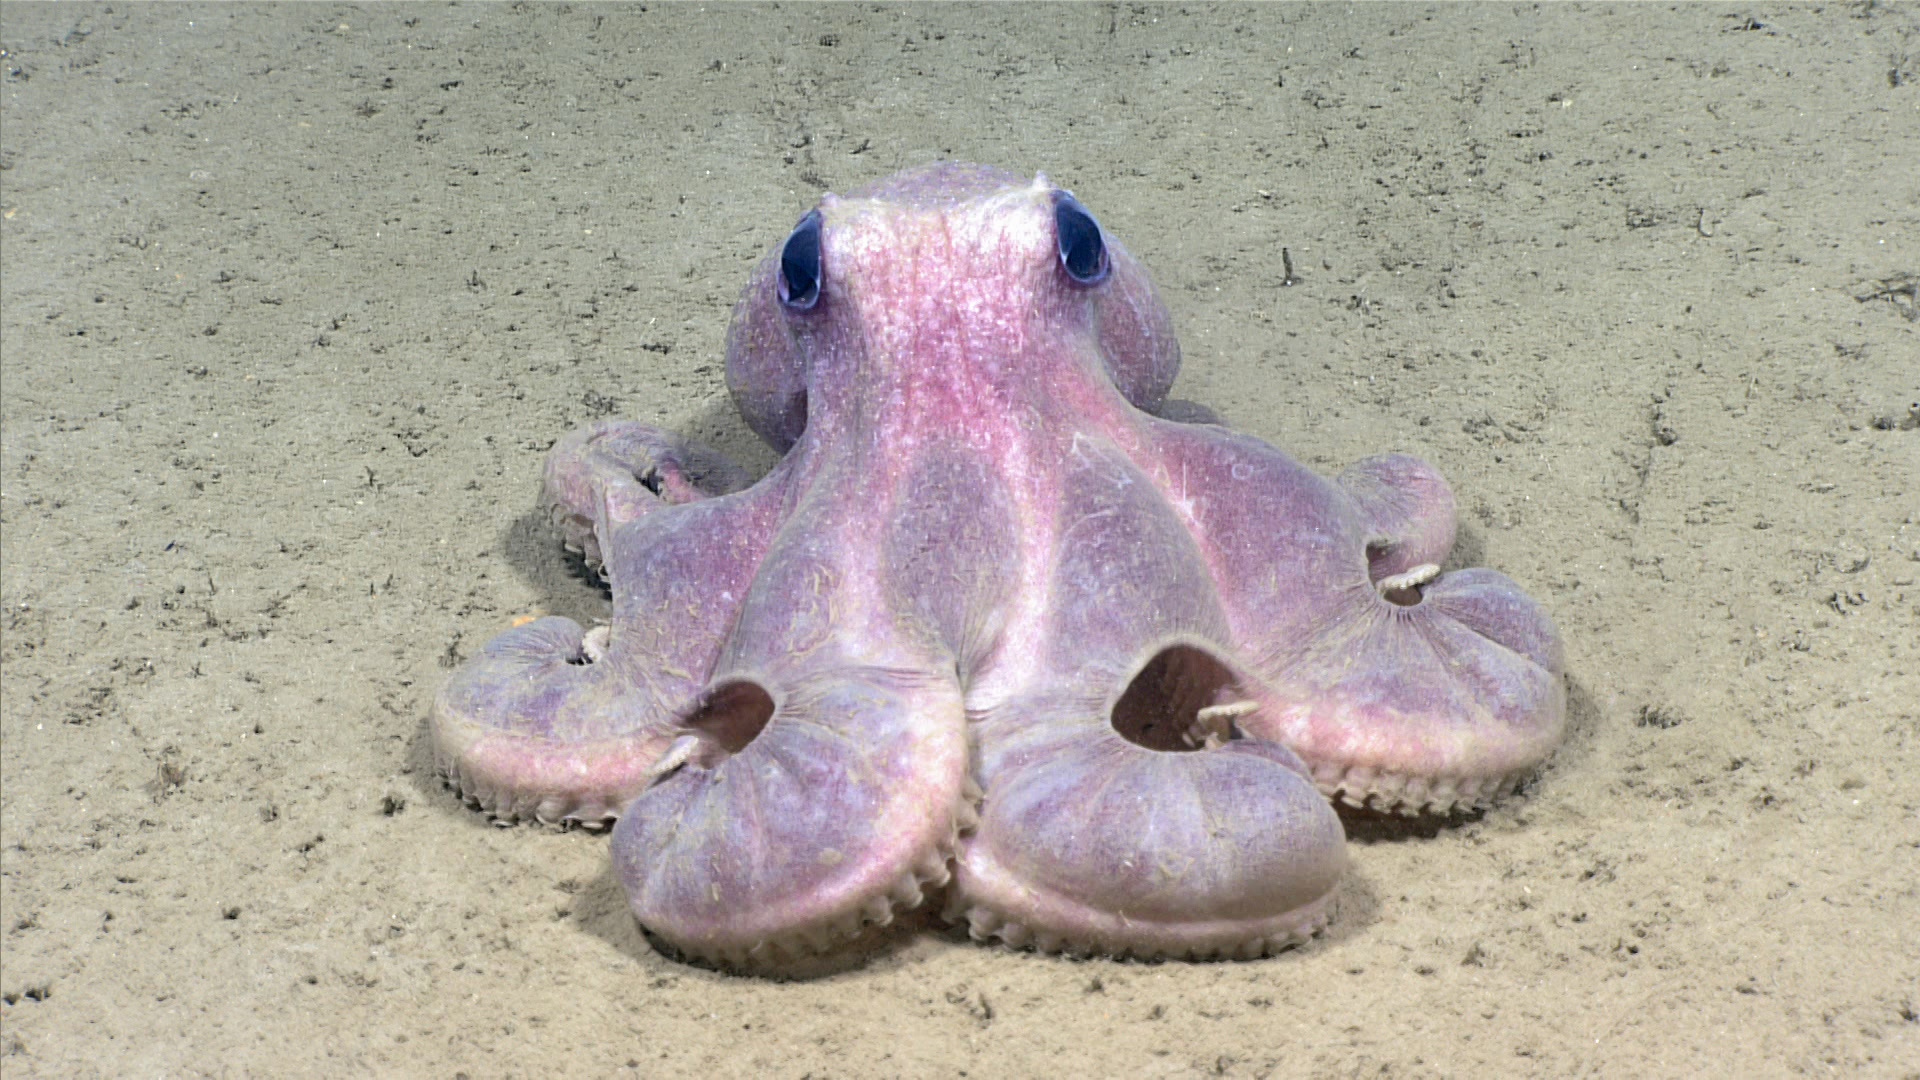 A deepwater octopus, Gradeledone verrucosa, is one of many species found within the proposed Hudson Canyon sanctuary area.